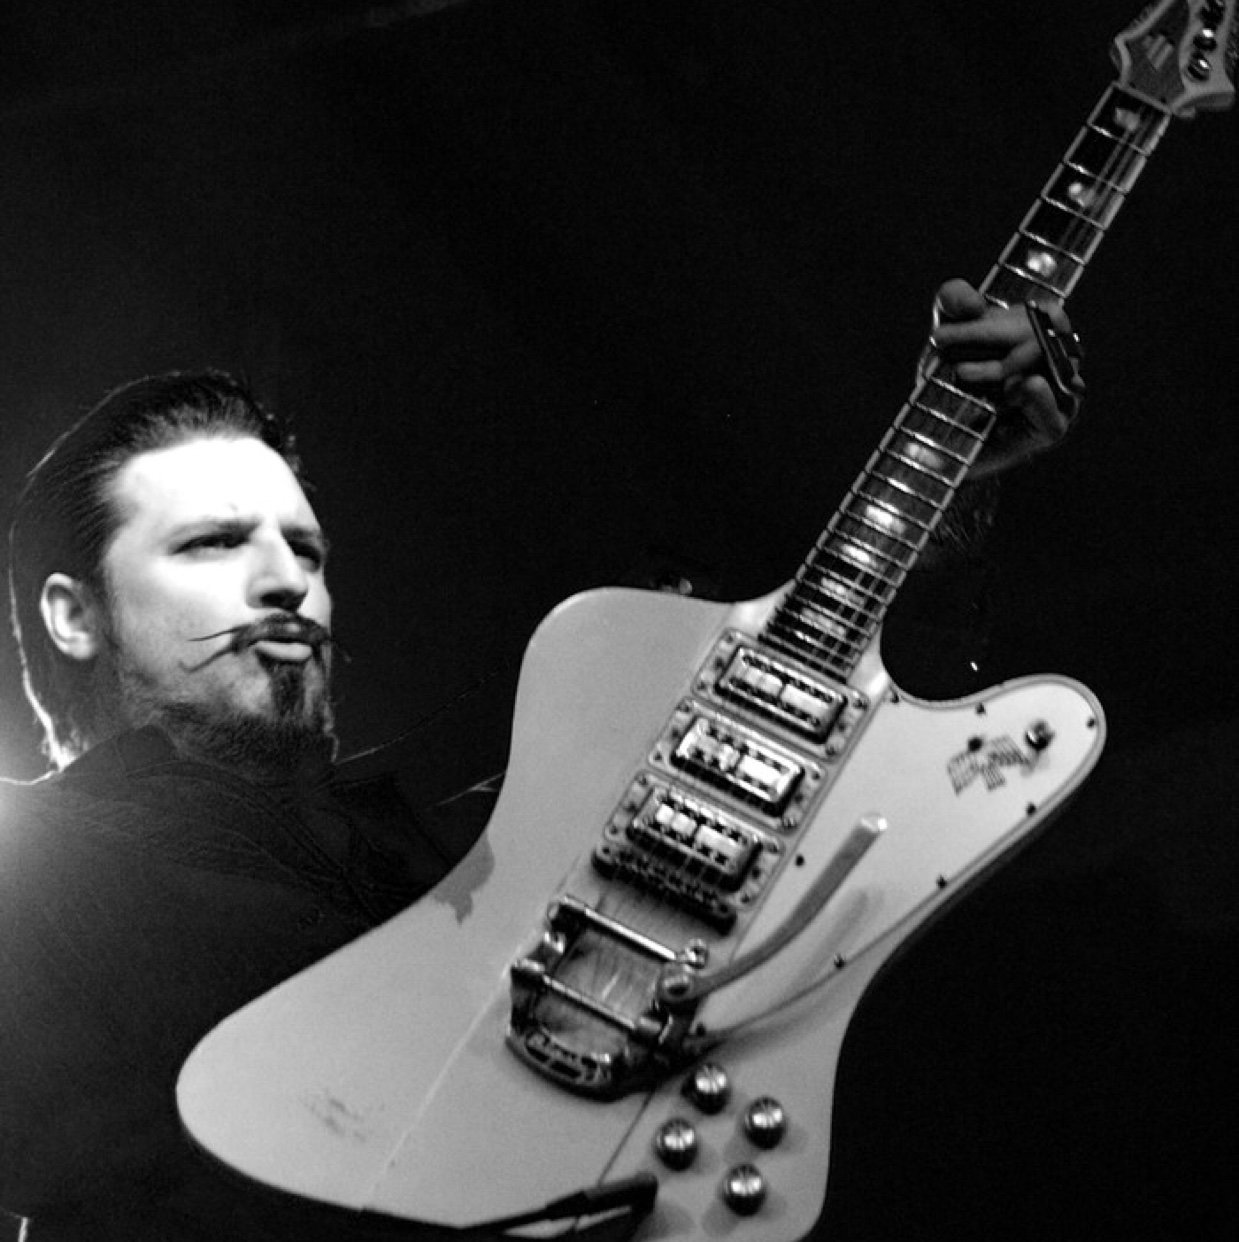 Guitarist in @rivalsons